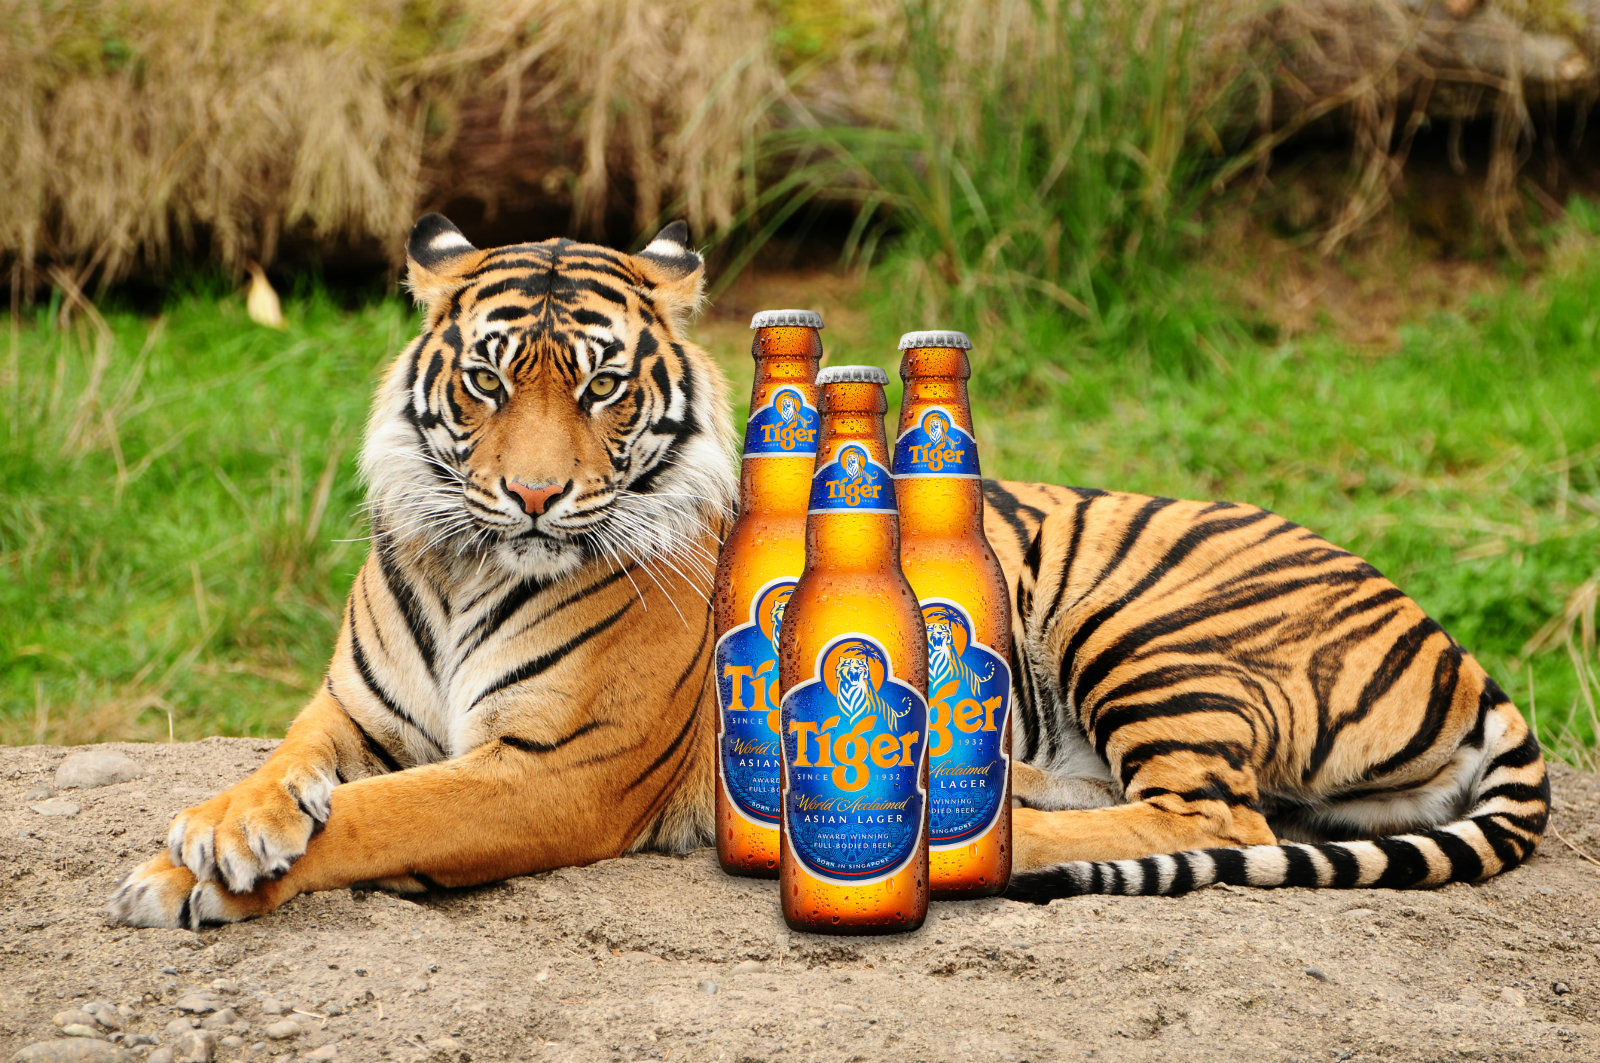 Tiger drinking Tiger. Is he a cannibal, or just an alcoholic?